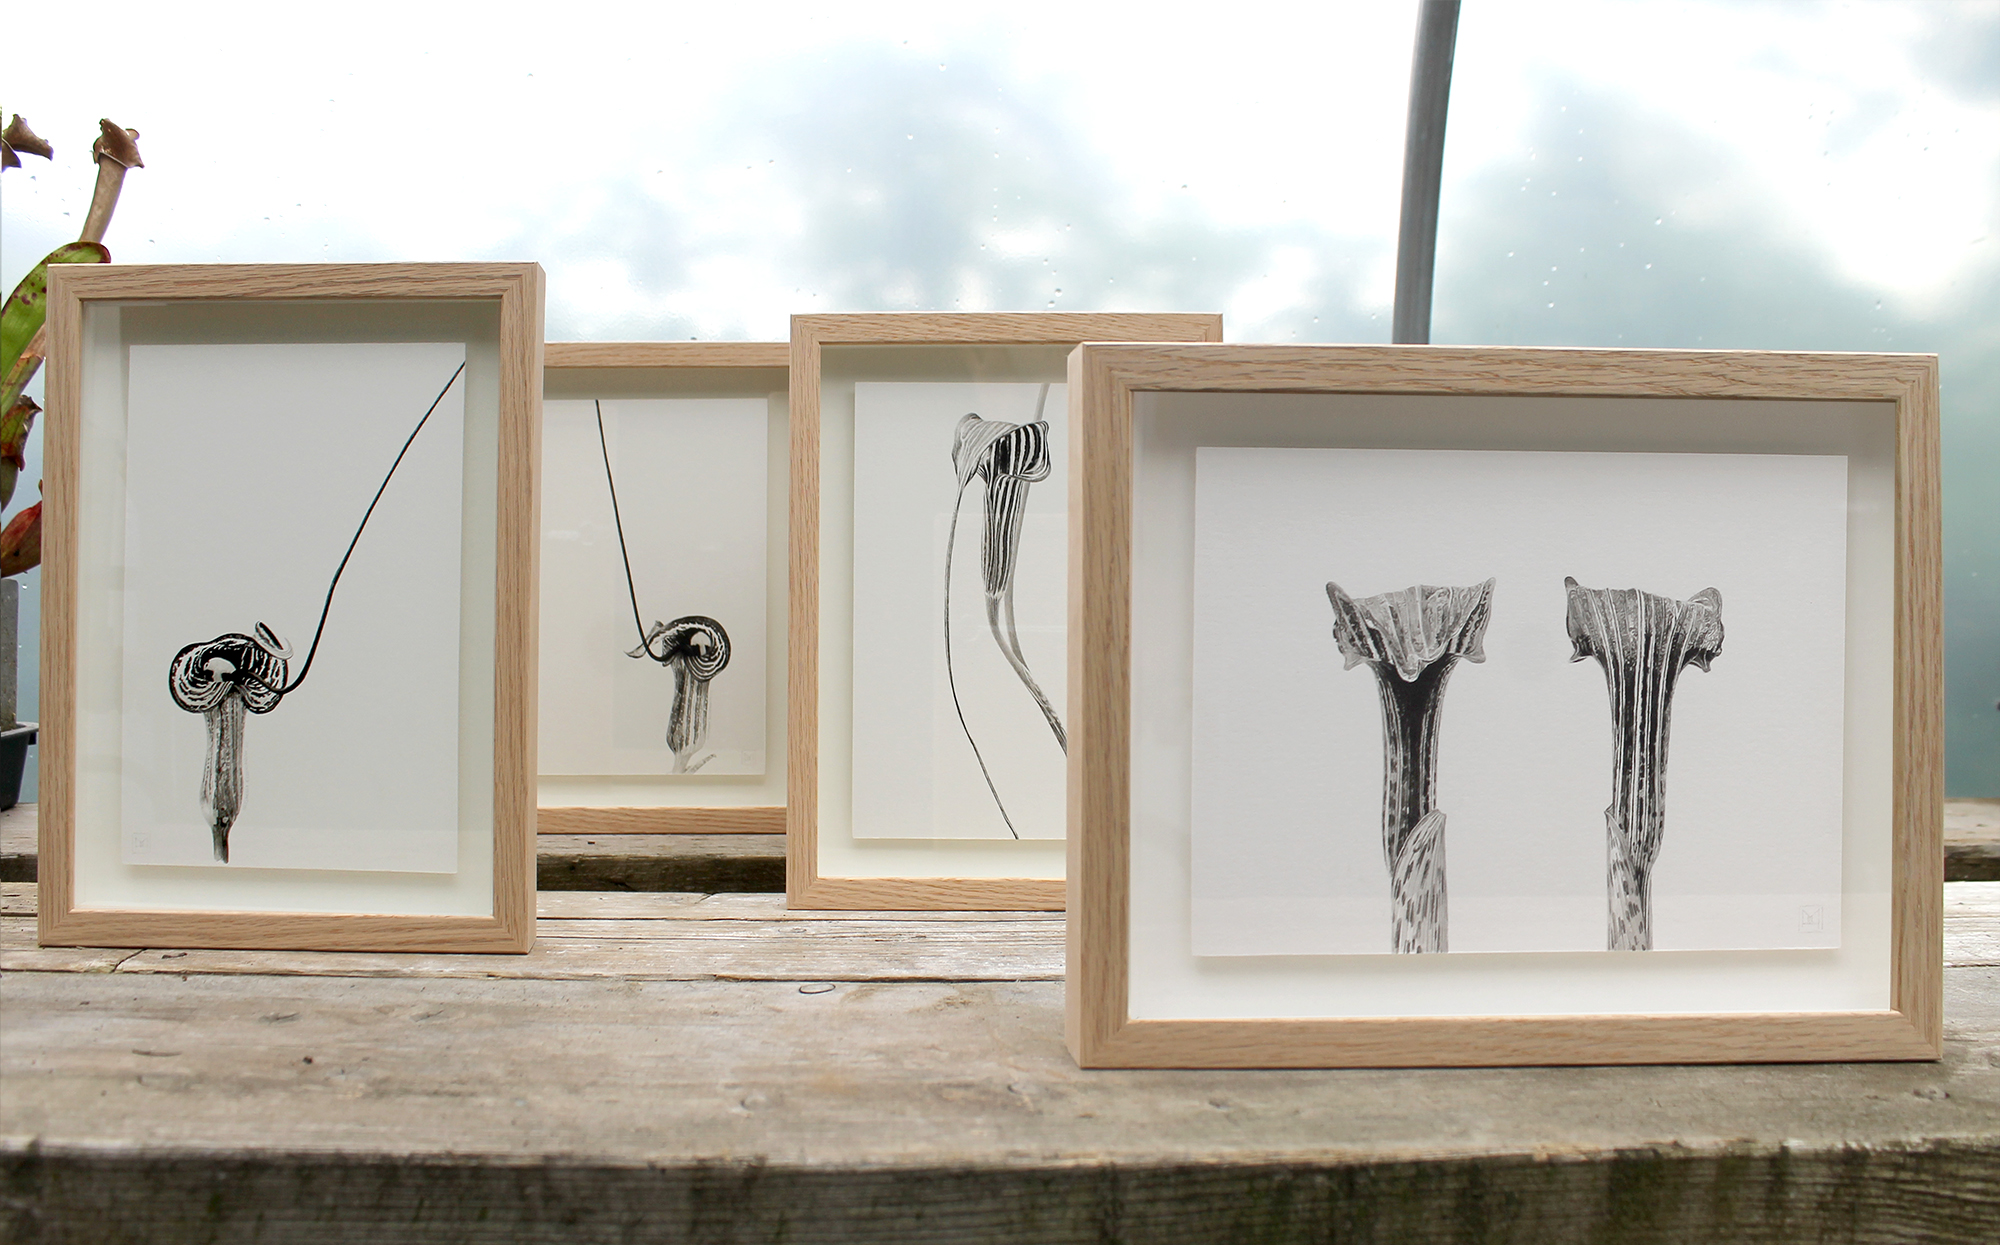 Framed Arisaema Japanese ink paste pieces, ready to go to the SBA Plantae 2022 show, in my polytunnel